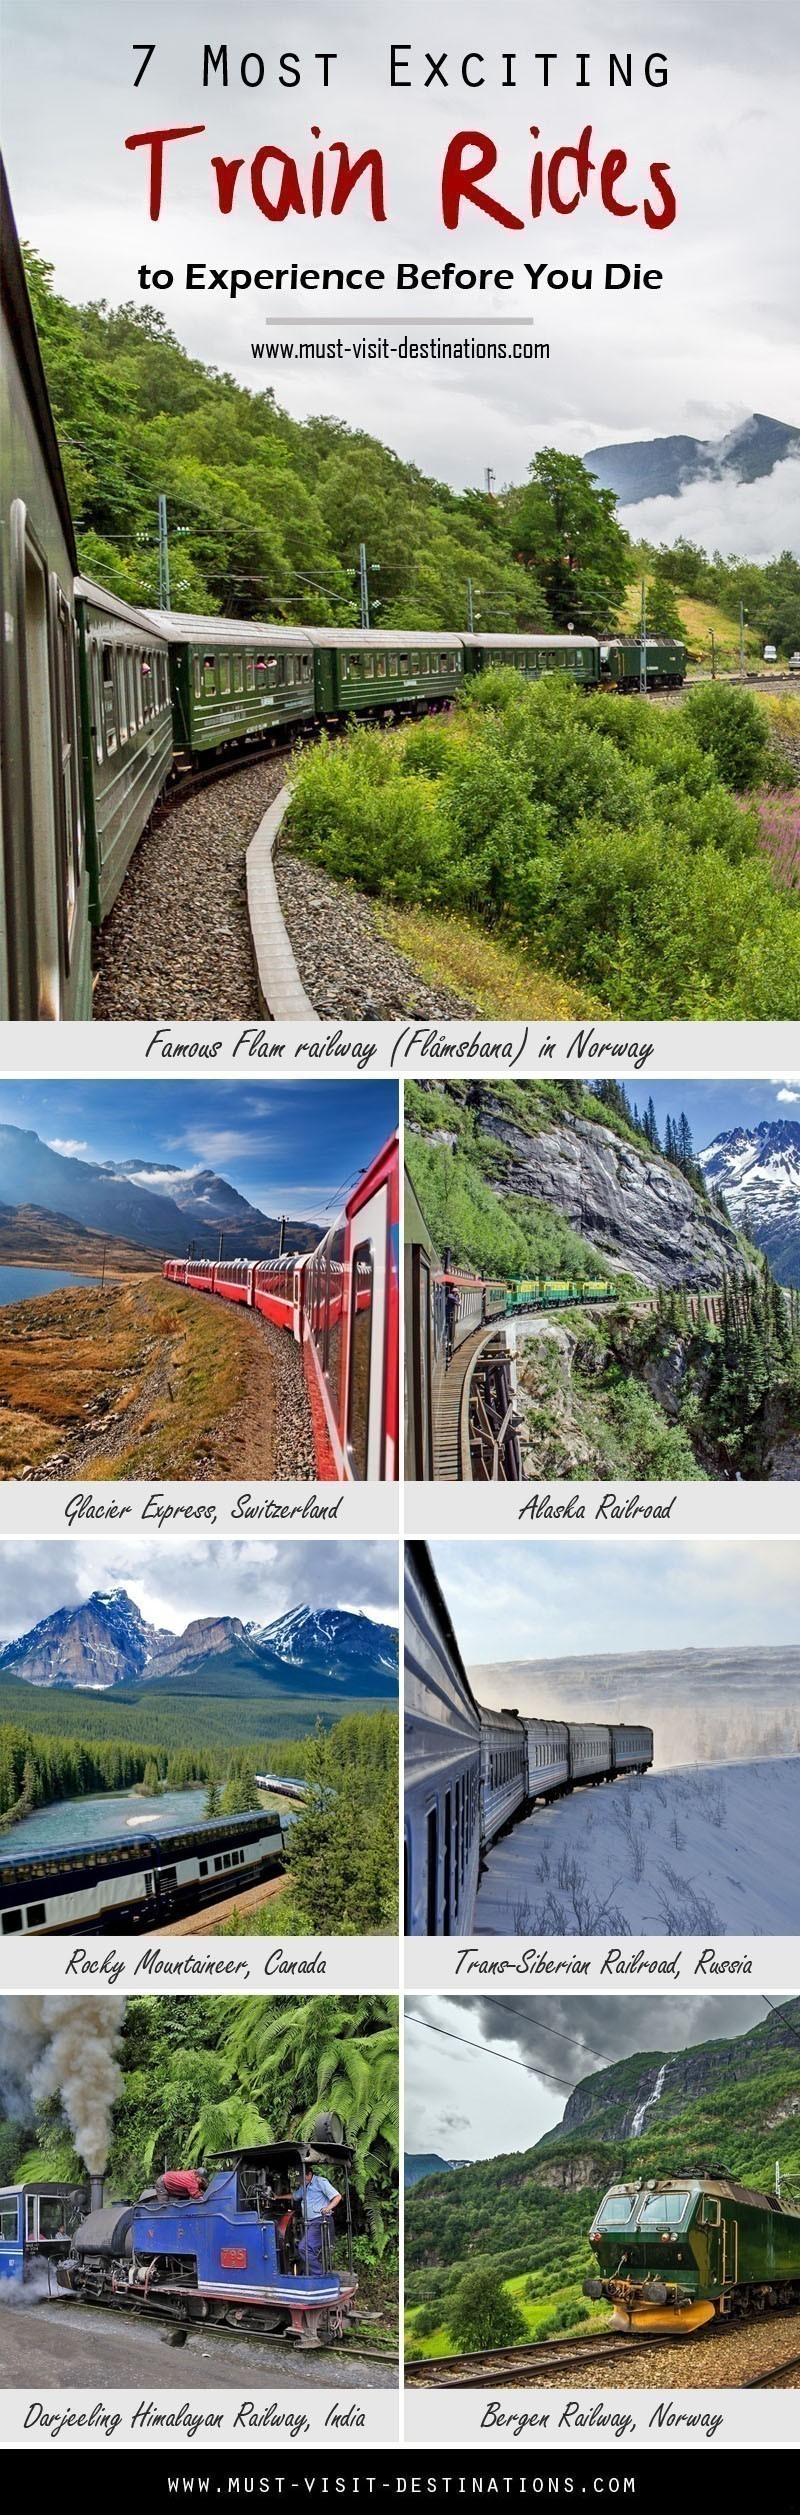 7 Most Exciting Train Rides To Experience Before You Die #travel